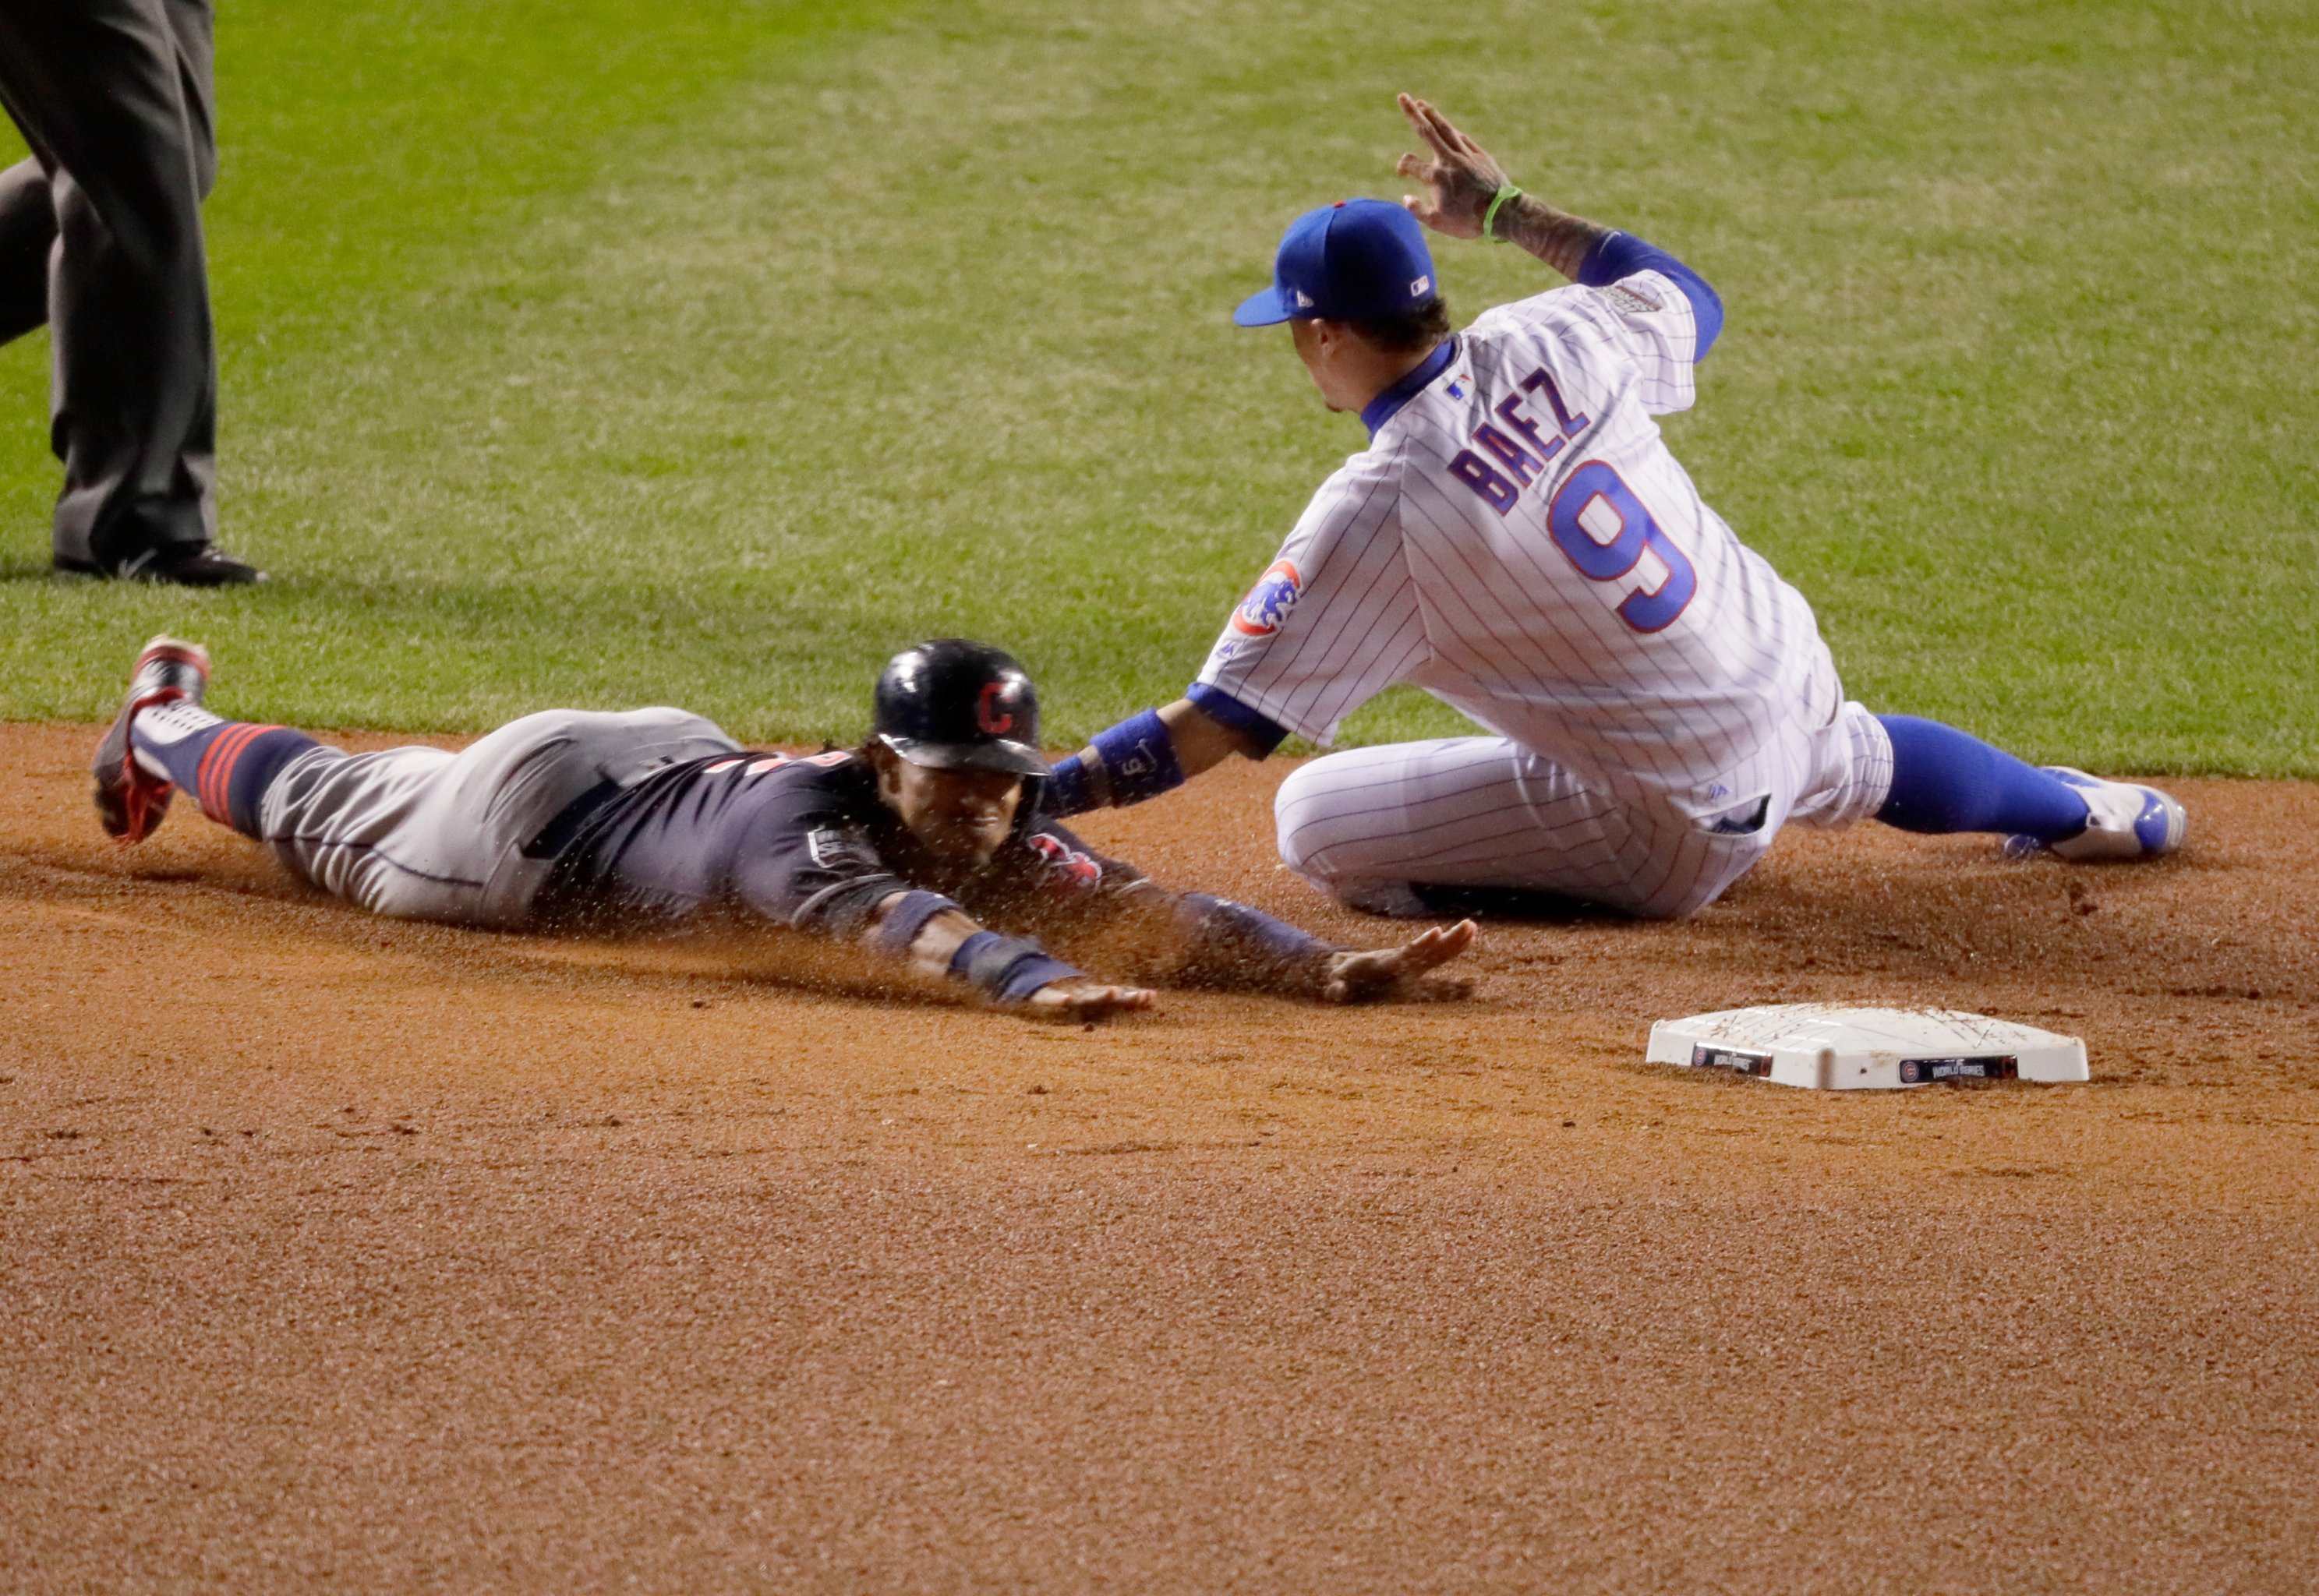 Cubs Swag King Javier Baez Can Be MLB's Best Weapon to Win Back